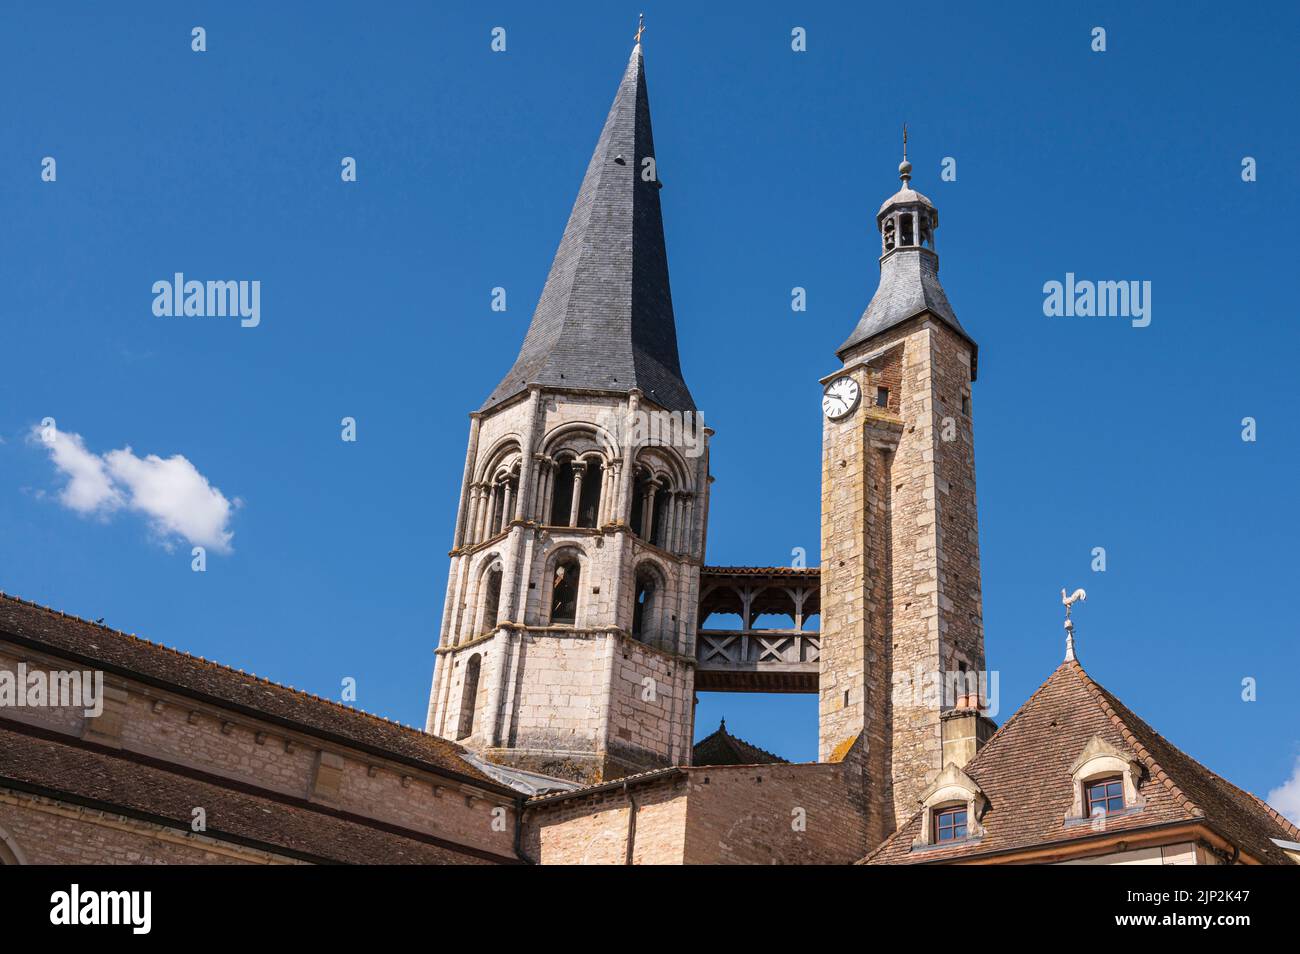 The church tower of Saint-Gengoux-le-National  in Burgunday, France Stock Photo